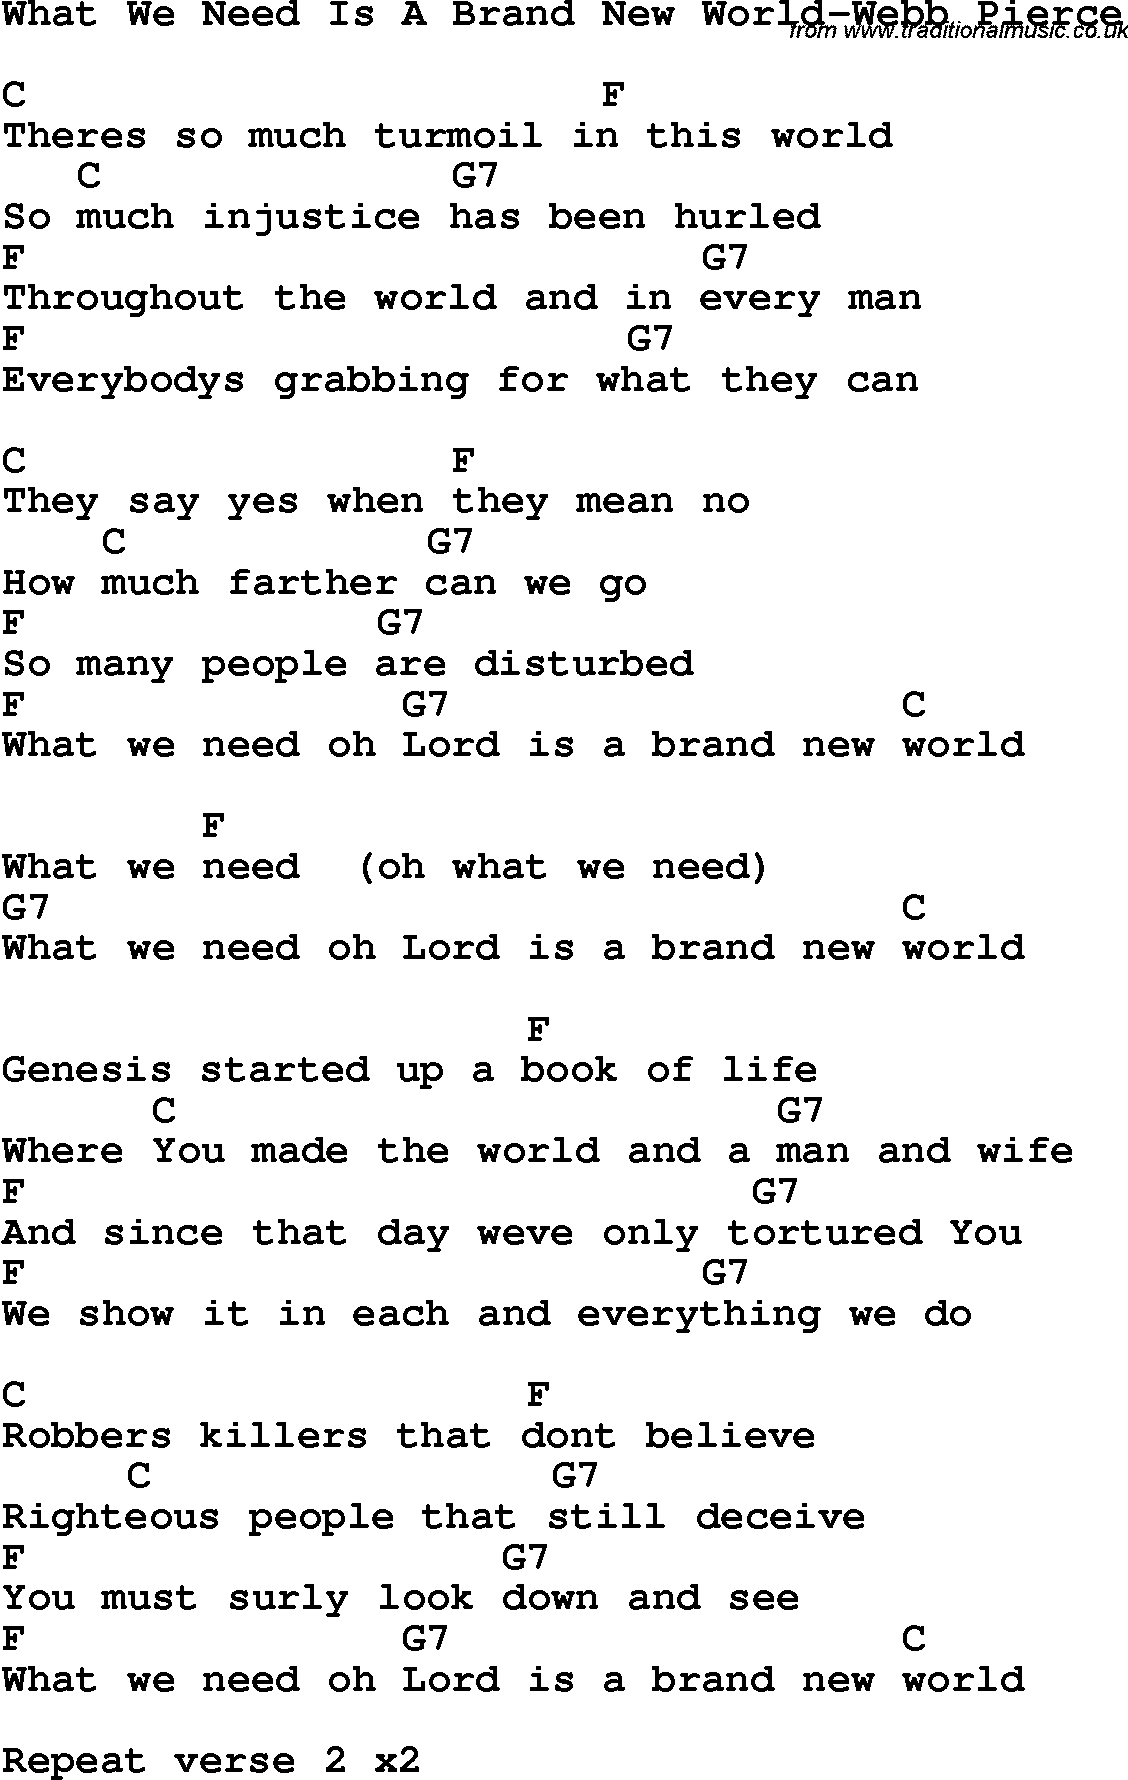 Country, Southern and Bluegrass Gospel Song What We Need Is A Brand New World-Webb Pierce lyrics and chords